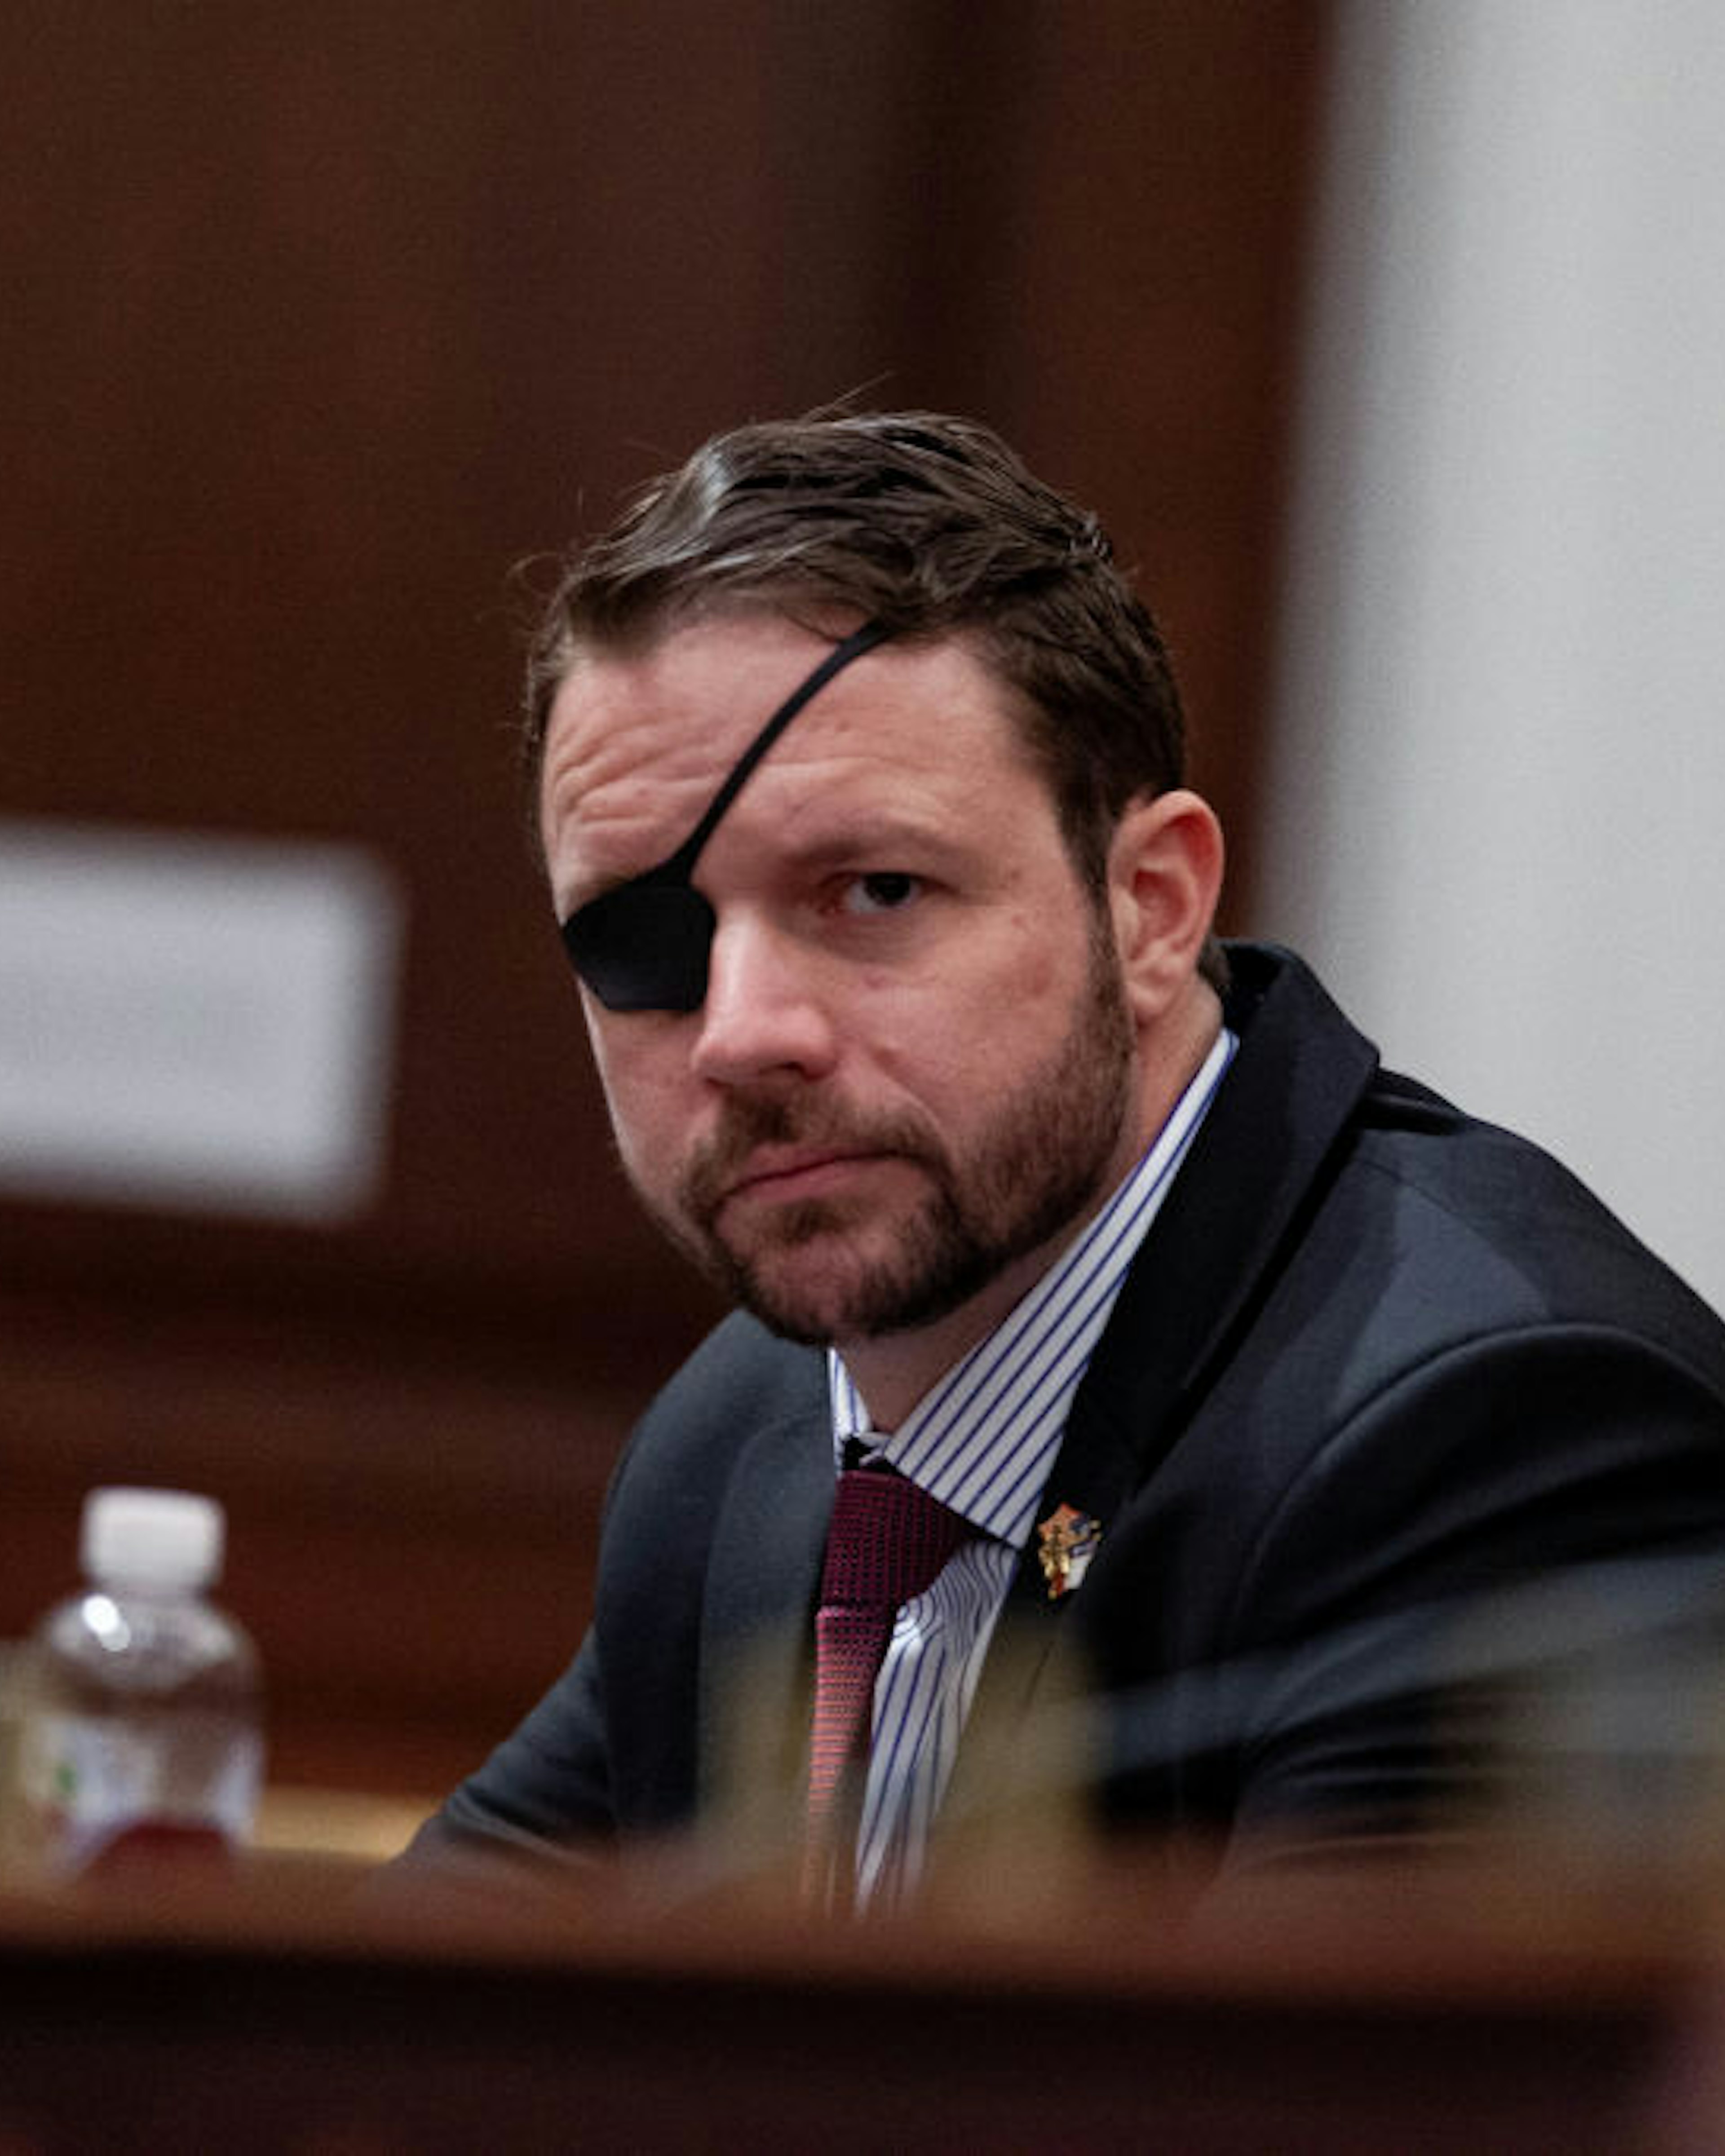 Representative Dan Crenshaw a Republican from Texas, listens during a House Budget Committee hearing with Russell Vought, acting director of the Office of Management and Budget (OMB), not pictured, in Washington, D.C., U.S., on Tuesday, March 12, 2019. President Donald Trump will propose a U.S. budget that wouldn't balance for 15 years, even assuming stronger economic growth than private forecasters expect and with deep domestic spending cuts that have little chance of passing Congress. Vought said in a statement the proposal "embodies fiscal responsibility" and "shows that we can return to fiscal sanity without halting our economic resurgence." Photographer: Anna Moneymaker/Bloomberg via Getty Images